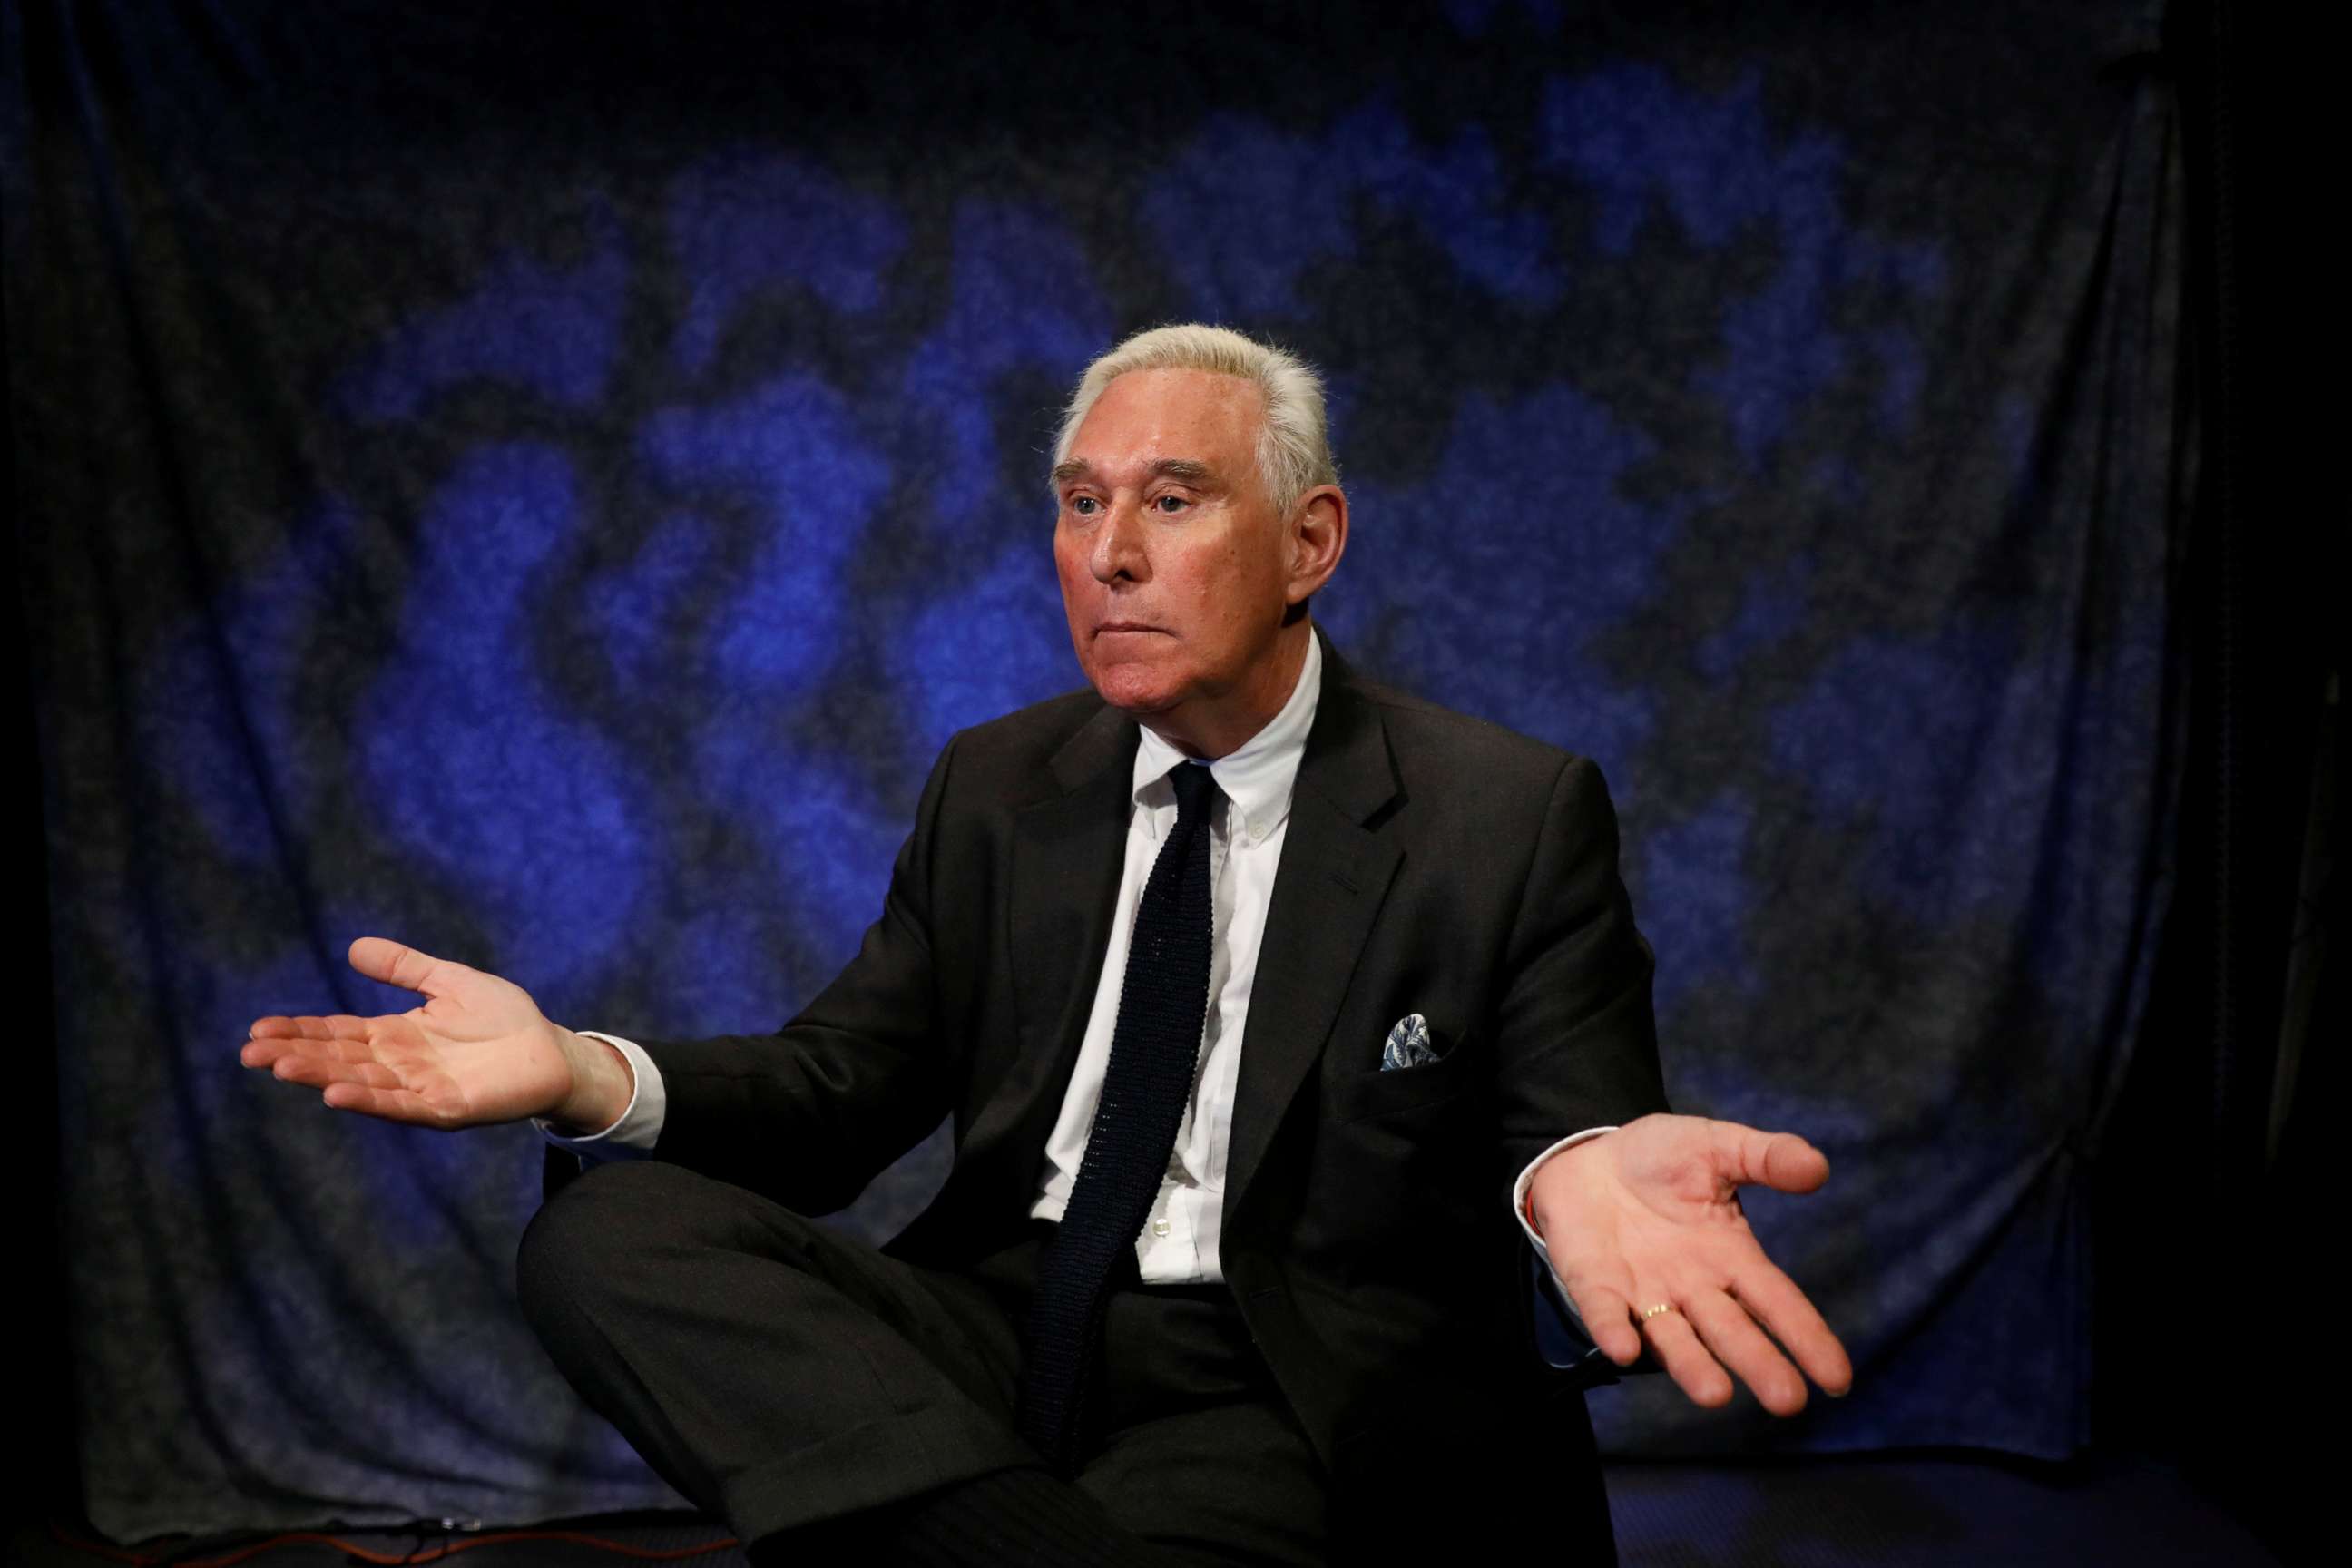 PHOTO: Political adviser Roger Stone gestures during an interview in New York City, Feb. 28, 2017.